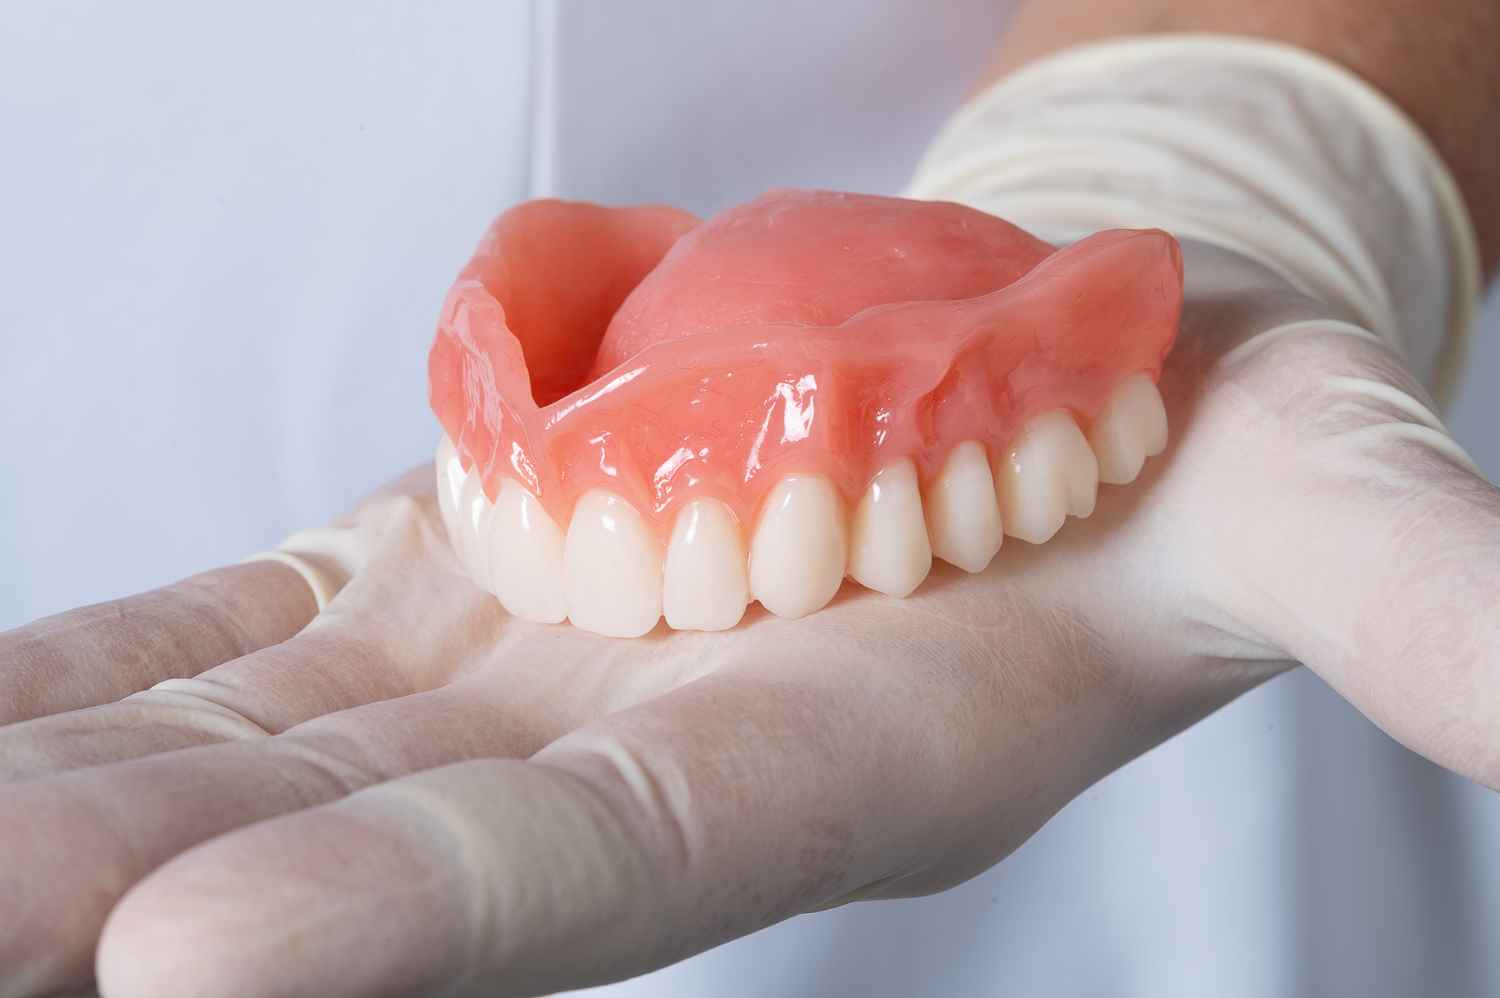 Your uncleaned dentures can lead to pneumonia, finds study. Read how